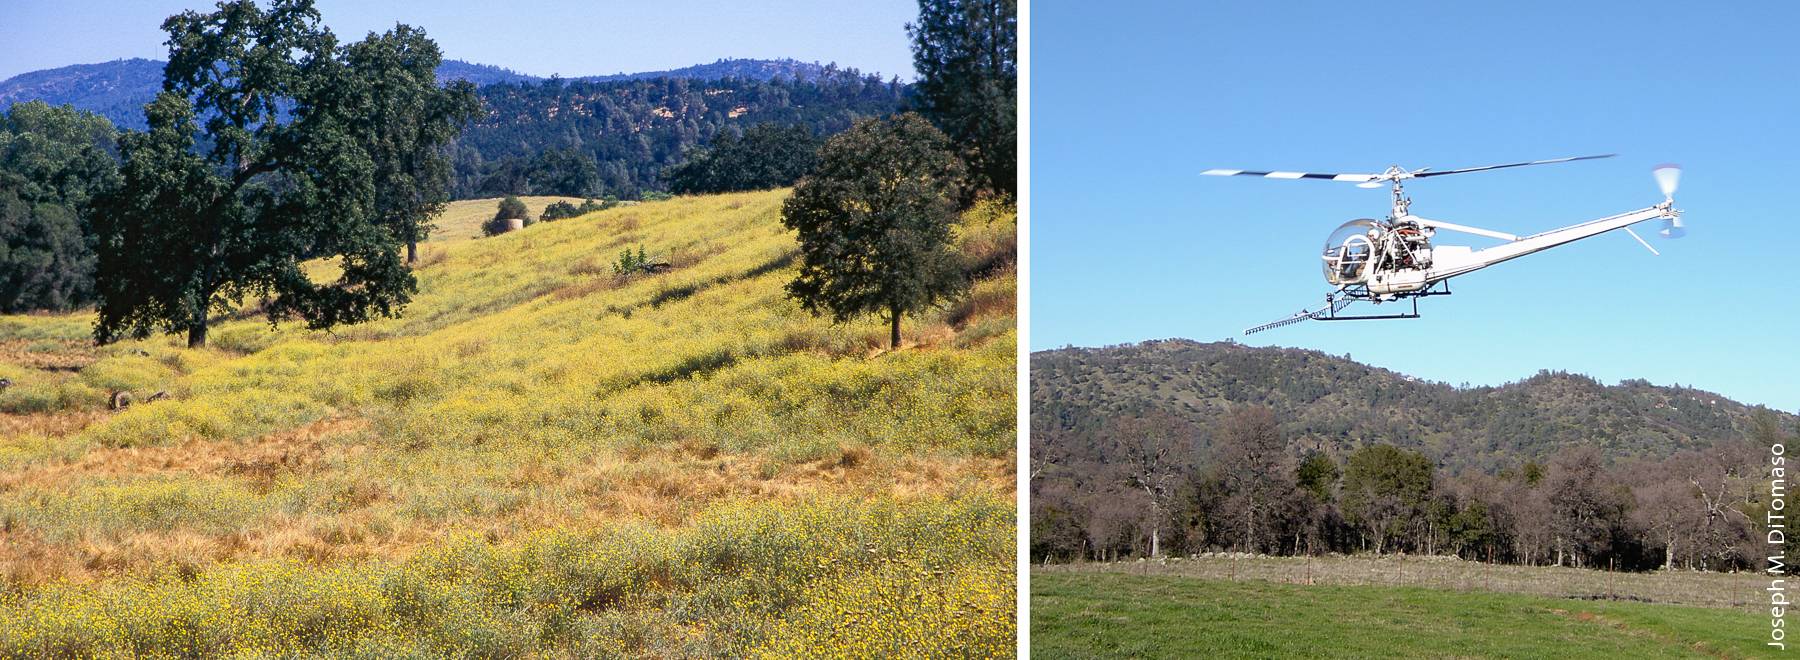 Yellow starthistle (Centaurea solstitialis) infestation, left; aerial spraying to control yellow starthistle near Sierra Foothill Research and Extension Center, right.